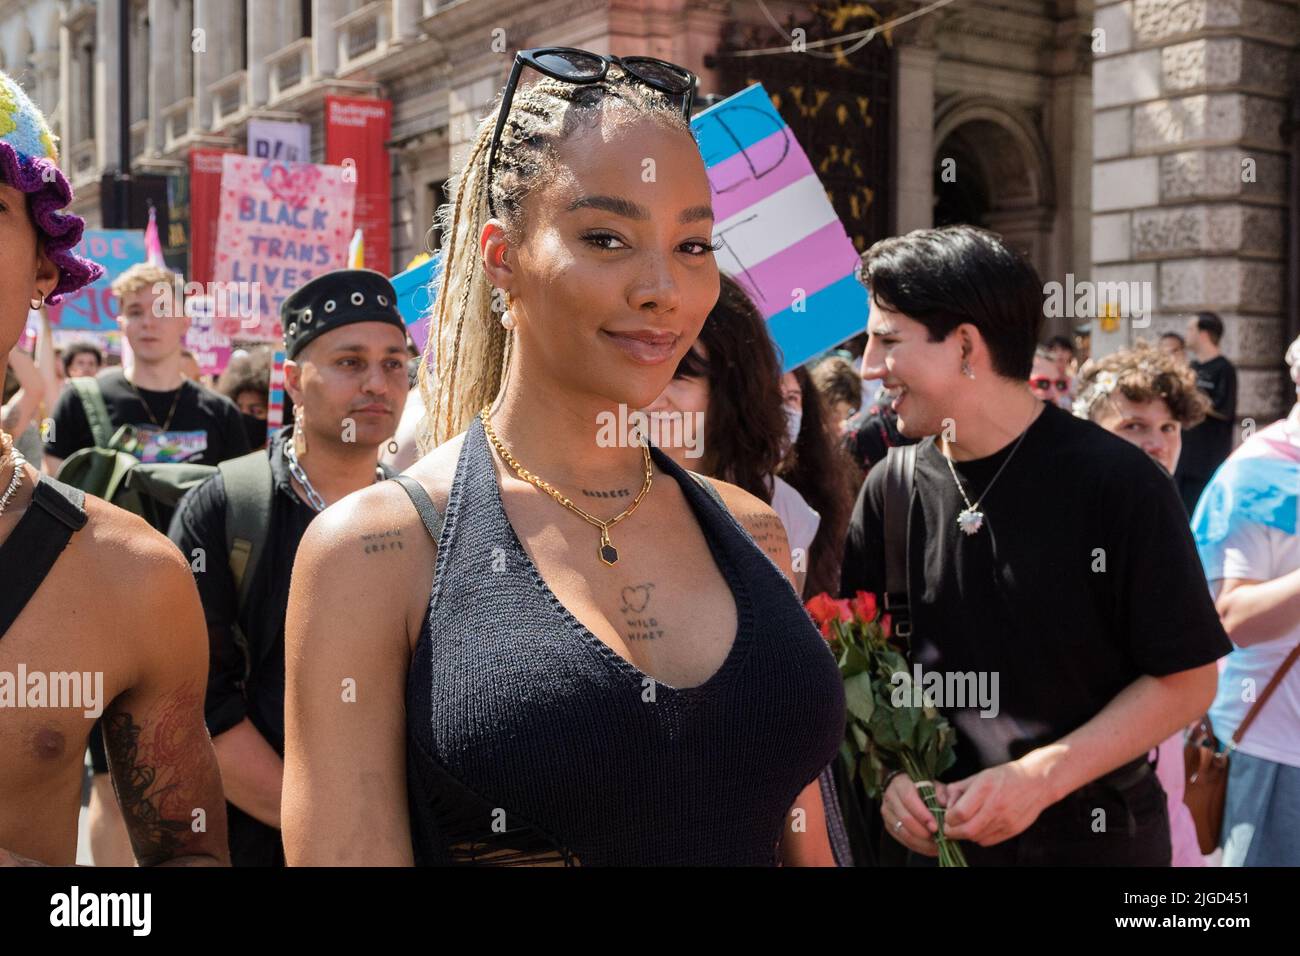 London, UK. 9th July, 2022. Transgender activist Munroe Bergdorf takes part in the fourth Trans Pride protest march for equality. Protesters demonstrate against the exclusion of trangender people from conversion therapy ban, call for abolition of the equalities watchdog Equalities and Human Rights Commission (EHRC) after a series of damaging interventions on trans rights, and show solidarity with Texan parents of trans children after the governor Greg Abbott compared gender-affirming healthcare to child abuse. Credit: Wiktor Szymanowicz/Alamy Live News Stock Photo